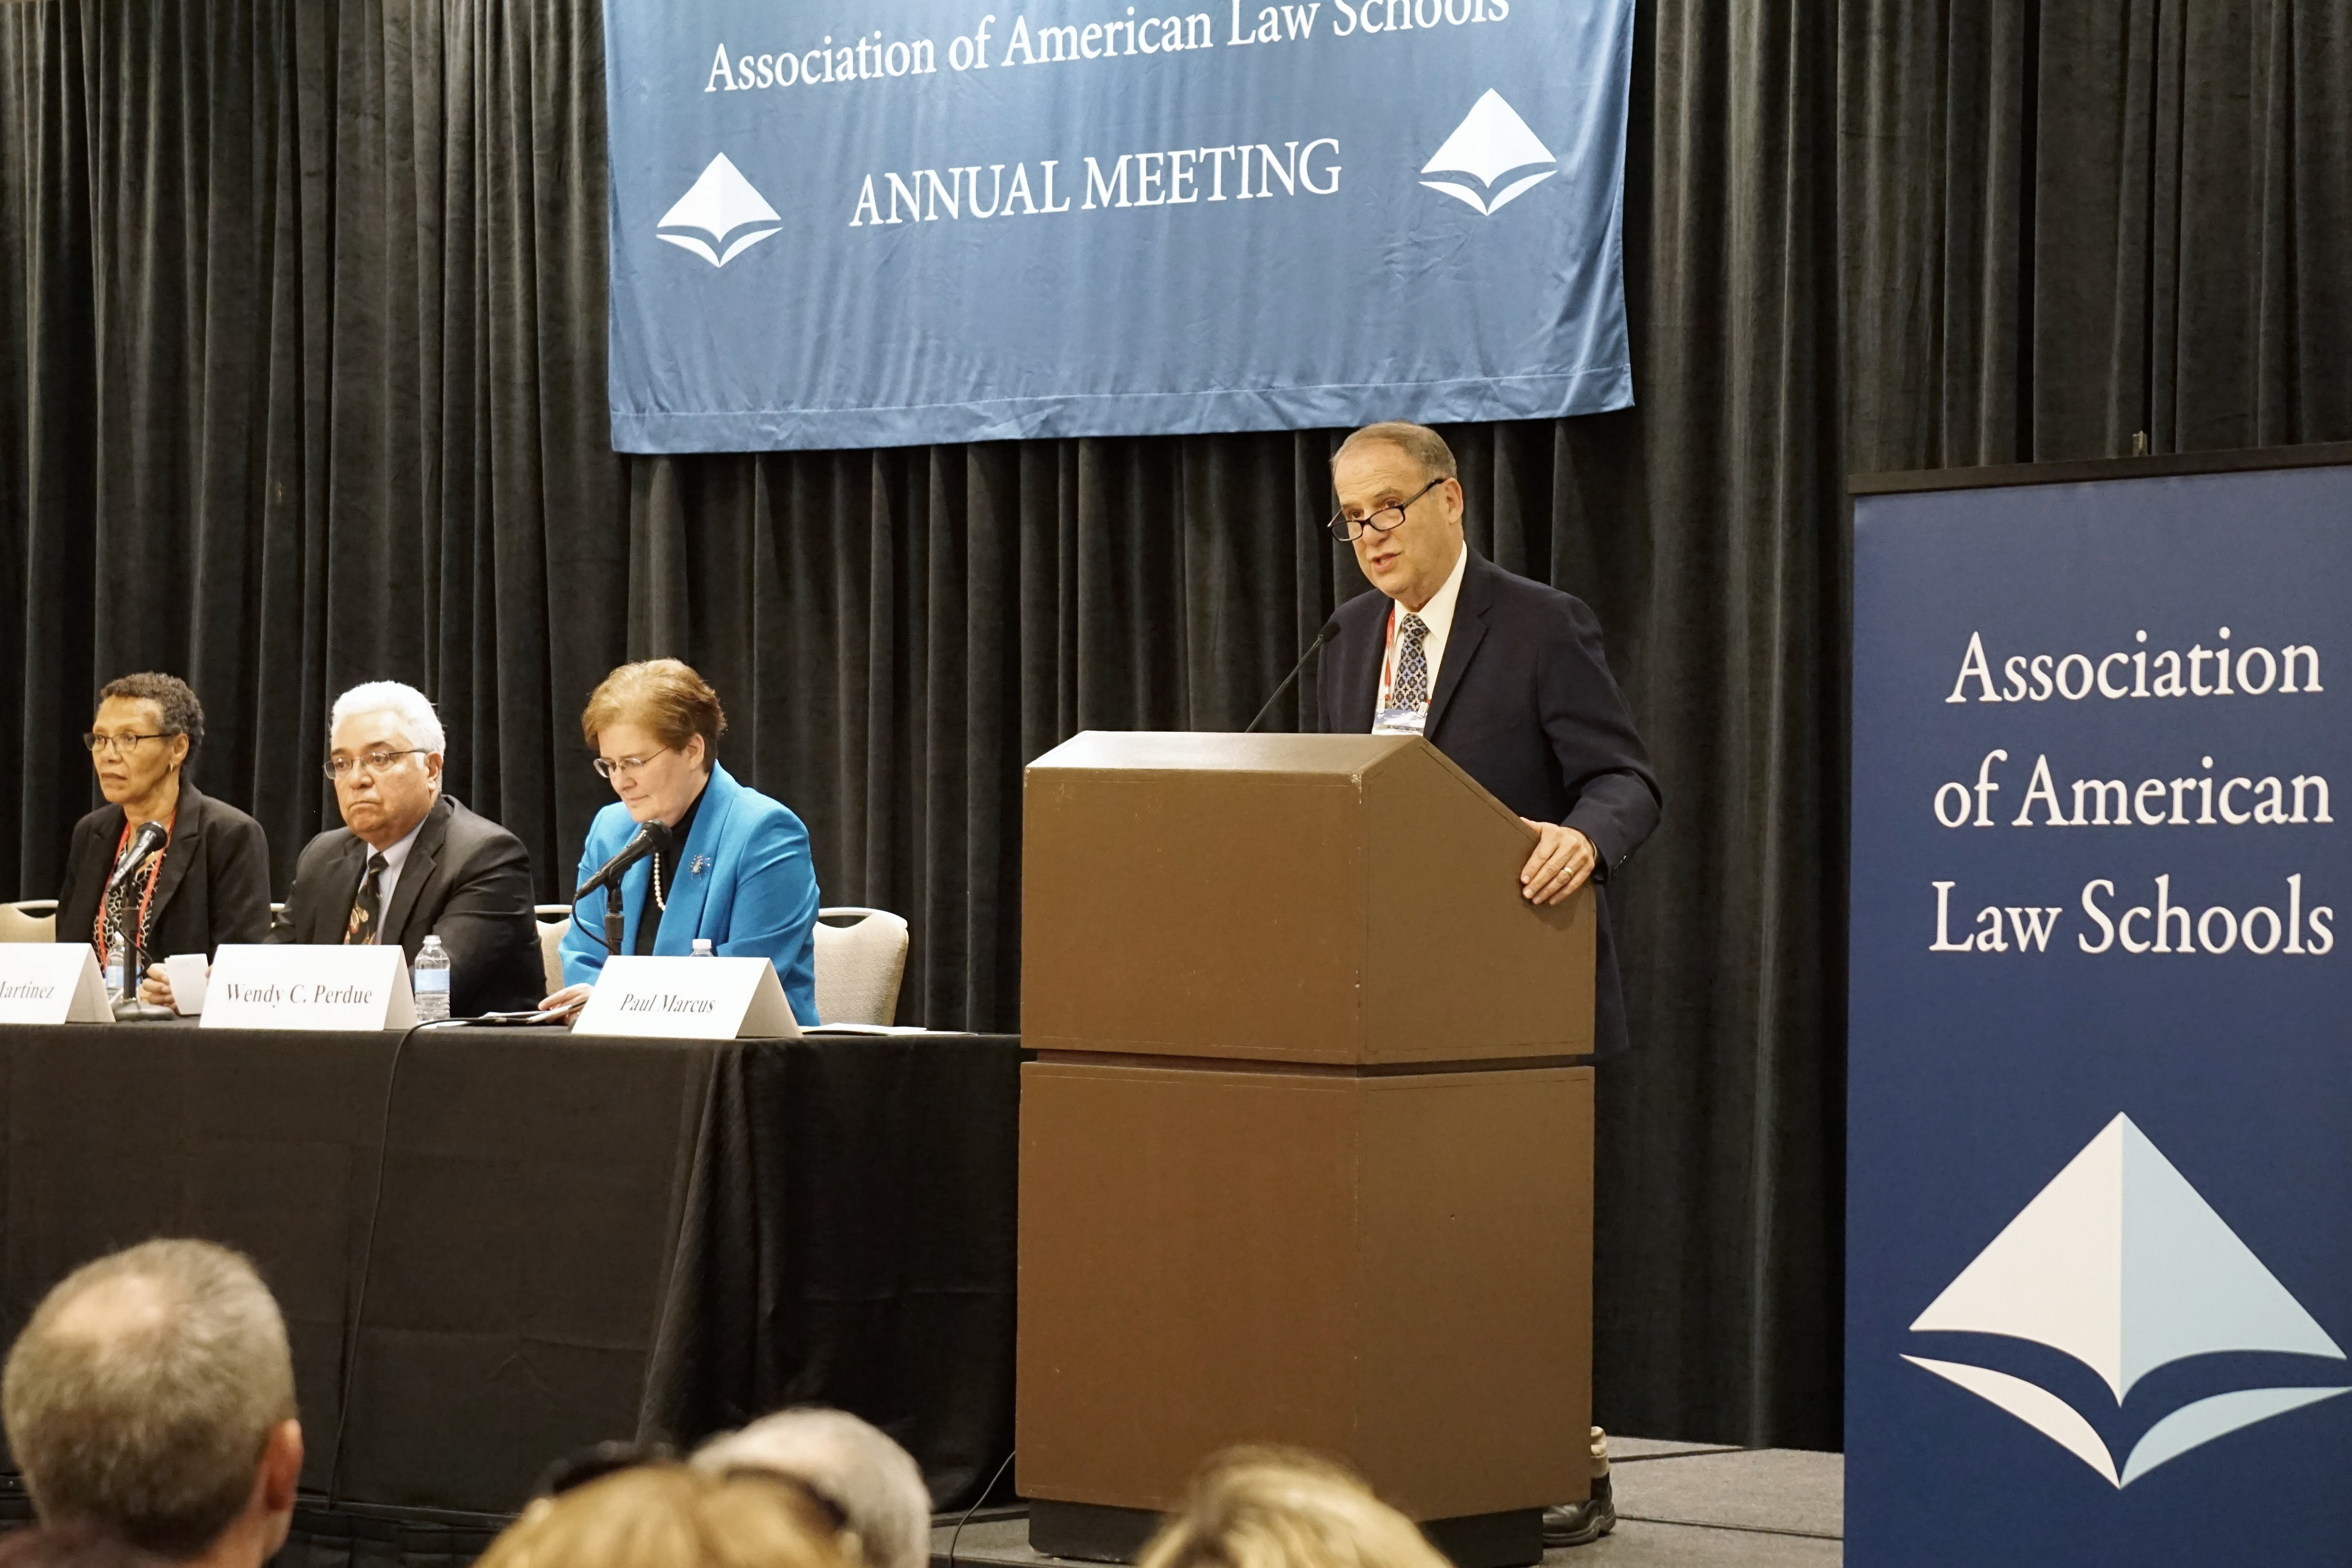 2017 AALS President Paul Marcus, William & Mary Law School, addresses the House of Representatives during the First Meeting along with Ginger Patterson, AALS Associate Director; Leo Martinez, University of California, Hastings College of the Law; and 2018 AALS President Wendy Perdue, Dean, University of Richmond School of Law